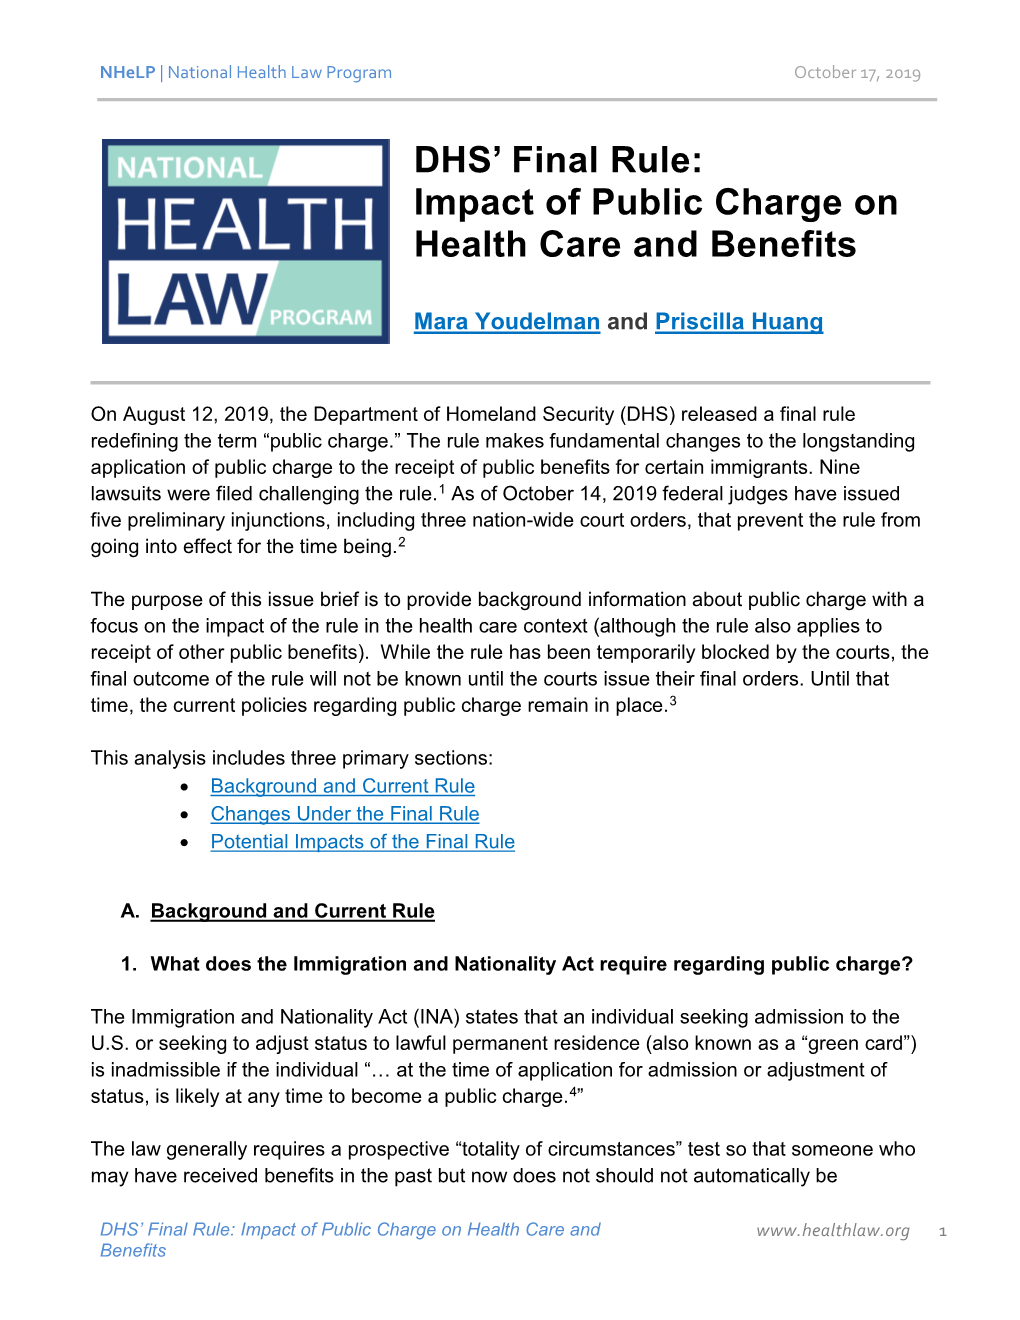 DHS' Final Rule: Impact of Public Charge on Health Care and Benefits